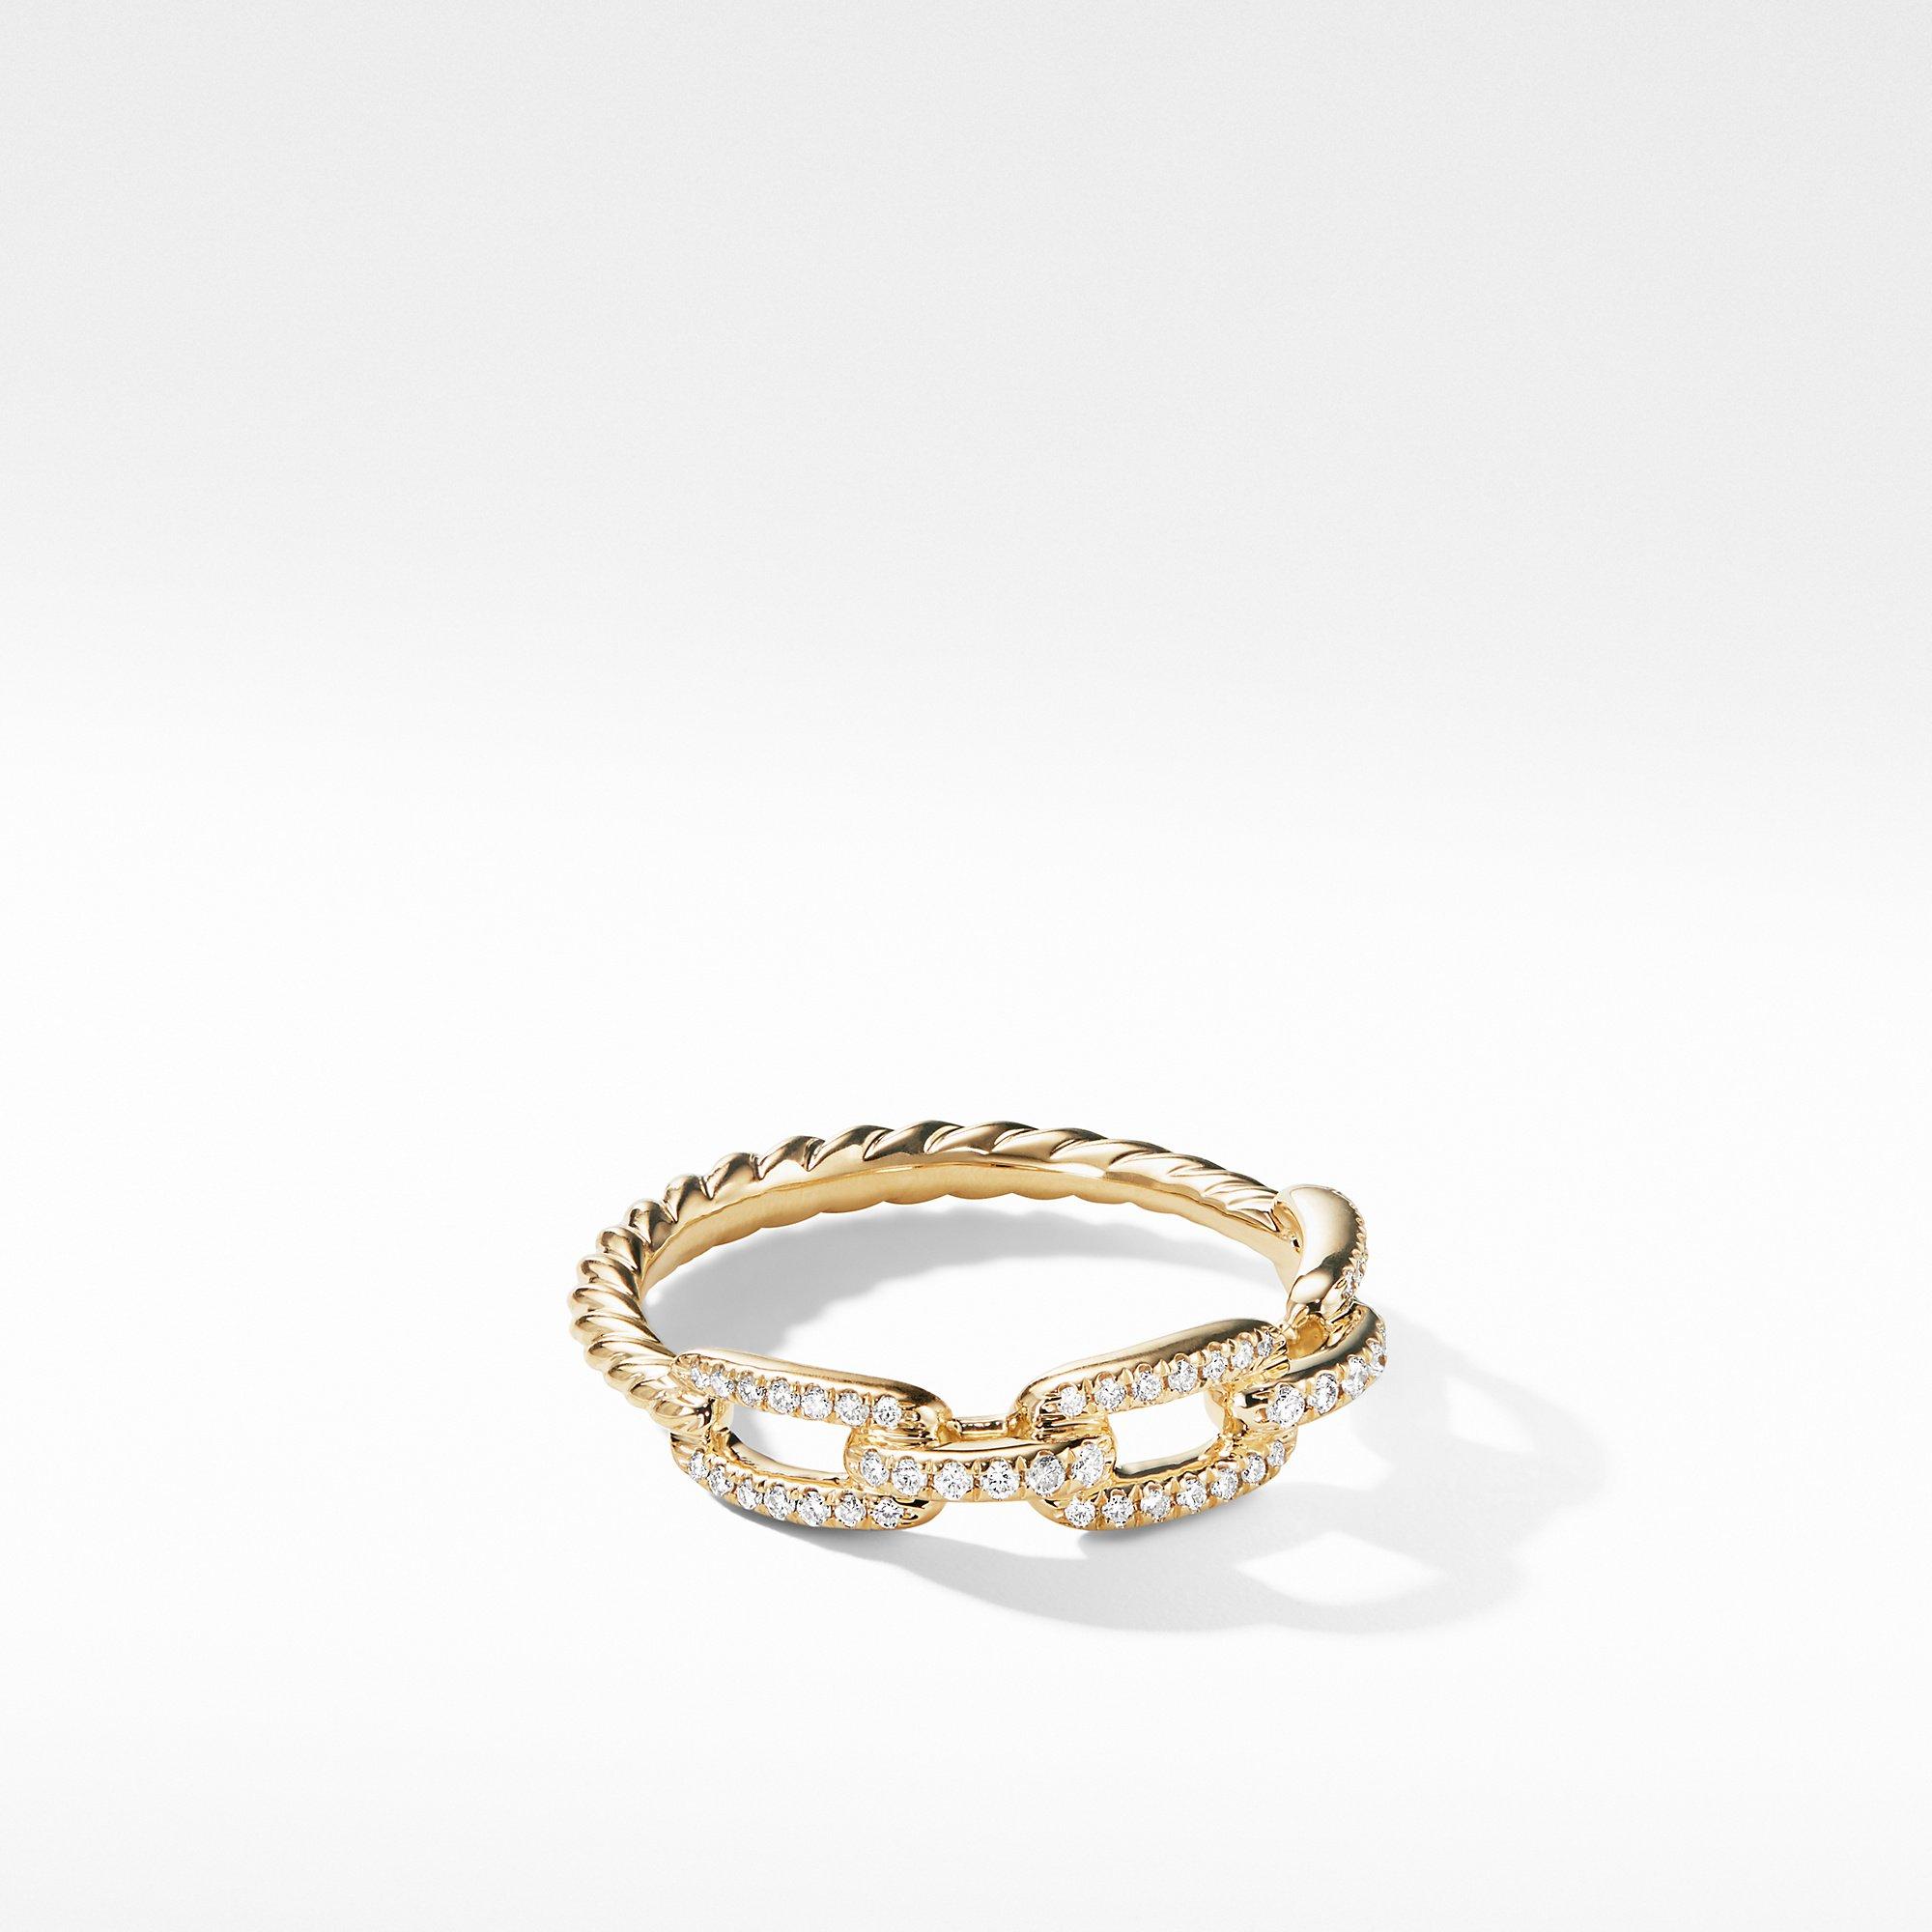 David Yurman Stax Single Row Pave Chain Link Ring with Diamonds in Yellow Gold, size 6